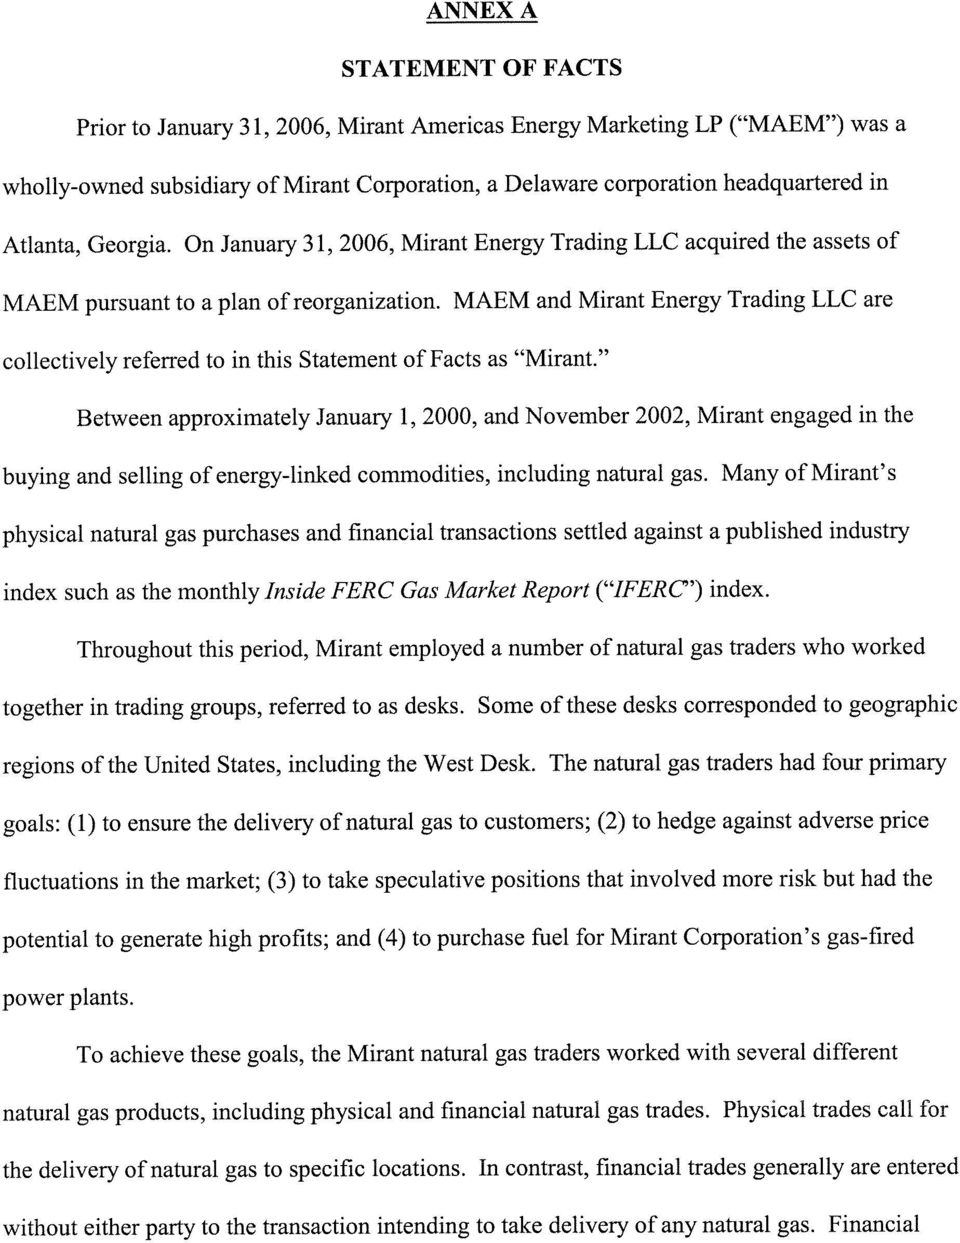 MAEM and Mirant Energy Trading LLC are collectively referred to in this Statement of Facts as "Mirant.